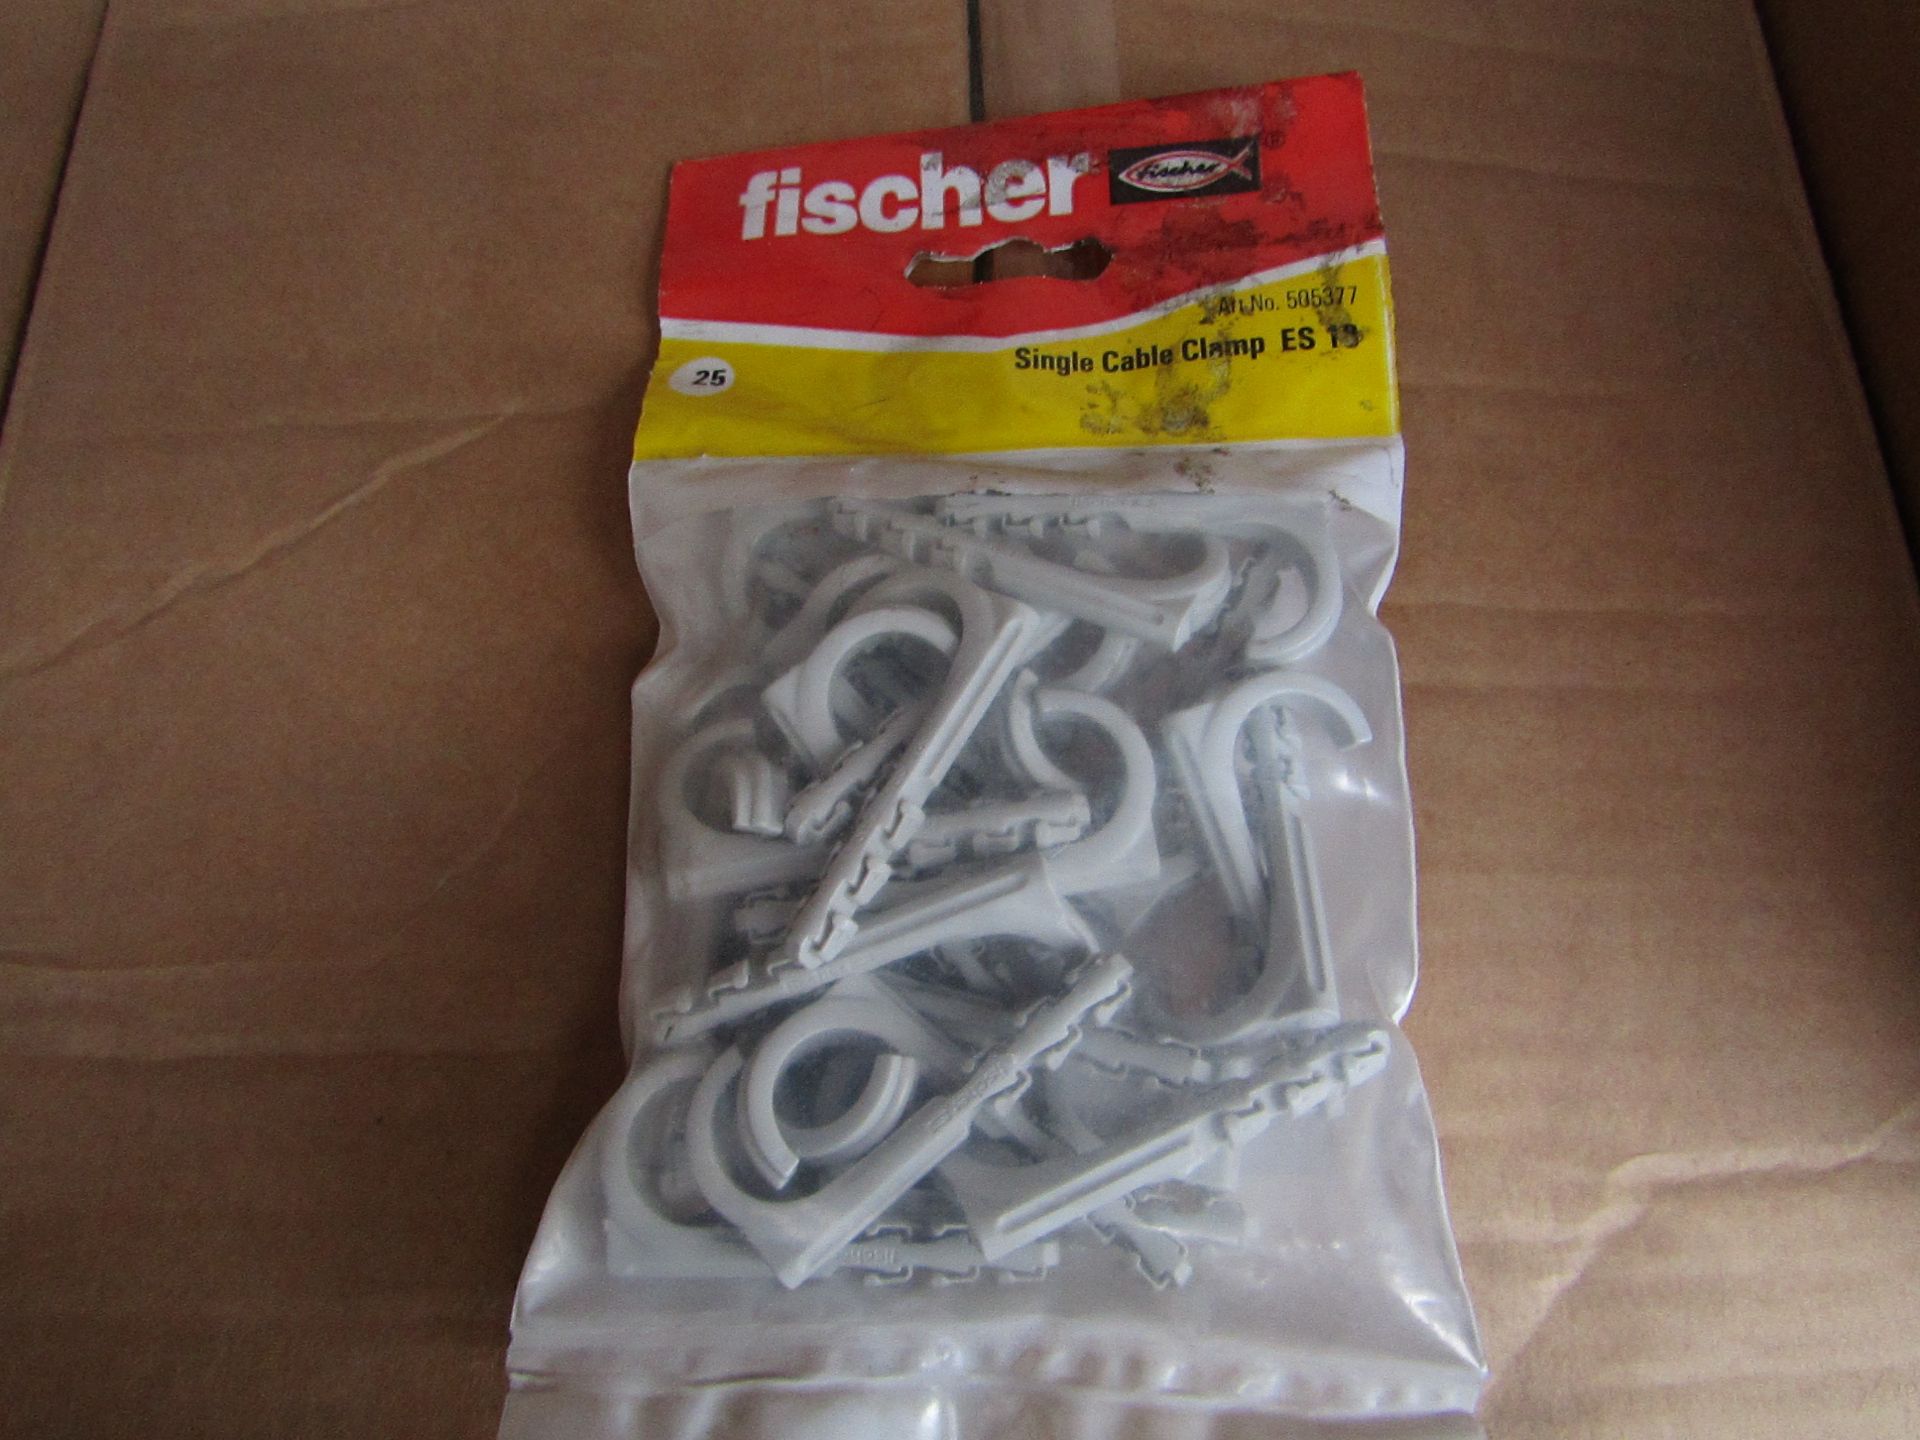 16x Fischer - Single Cable Clamp ES 18 - (Packs of 25) - New & Packaged.